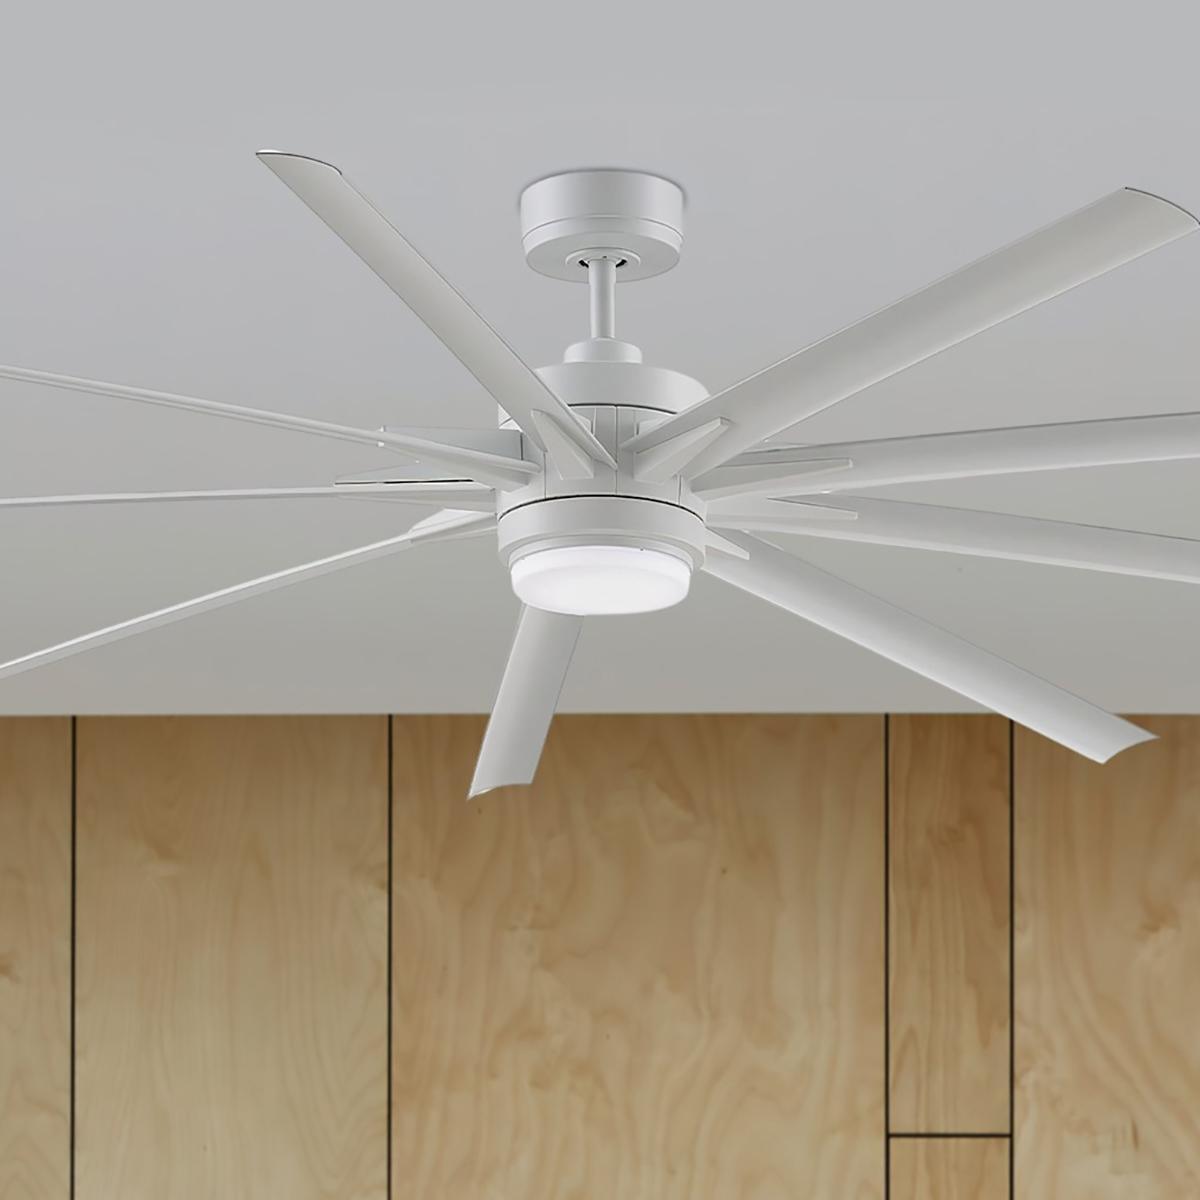 Odyn 84 Inch Windmill Outdoor Ceiling Fan With Light And Remote, 9 Blades, DC Motor - Bees Lighting